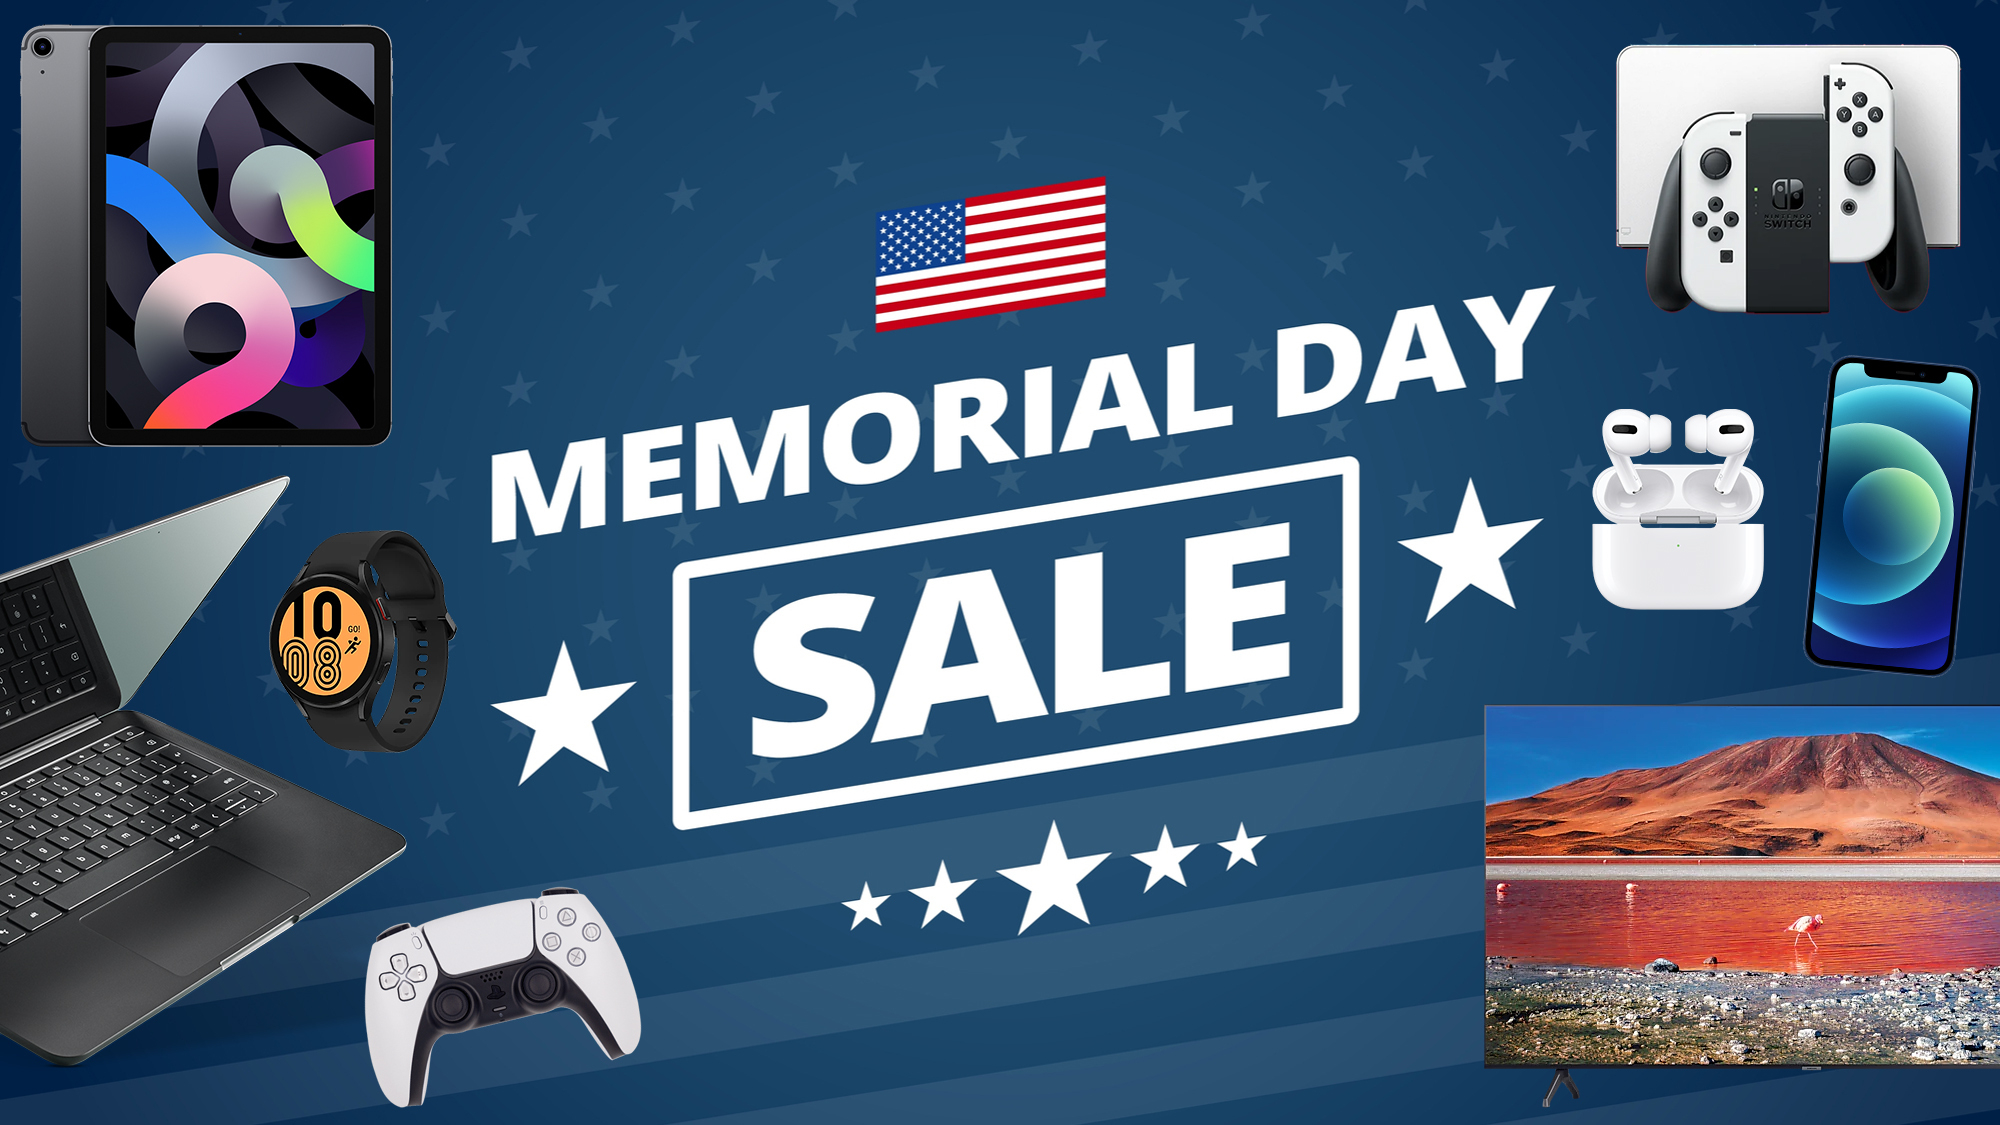 Are there Sales During Memorial Day